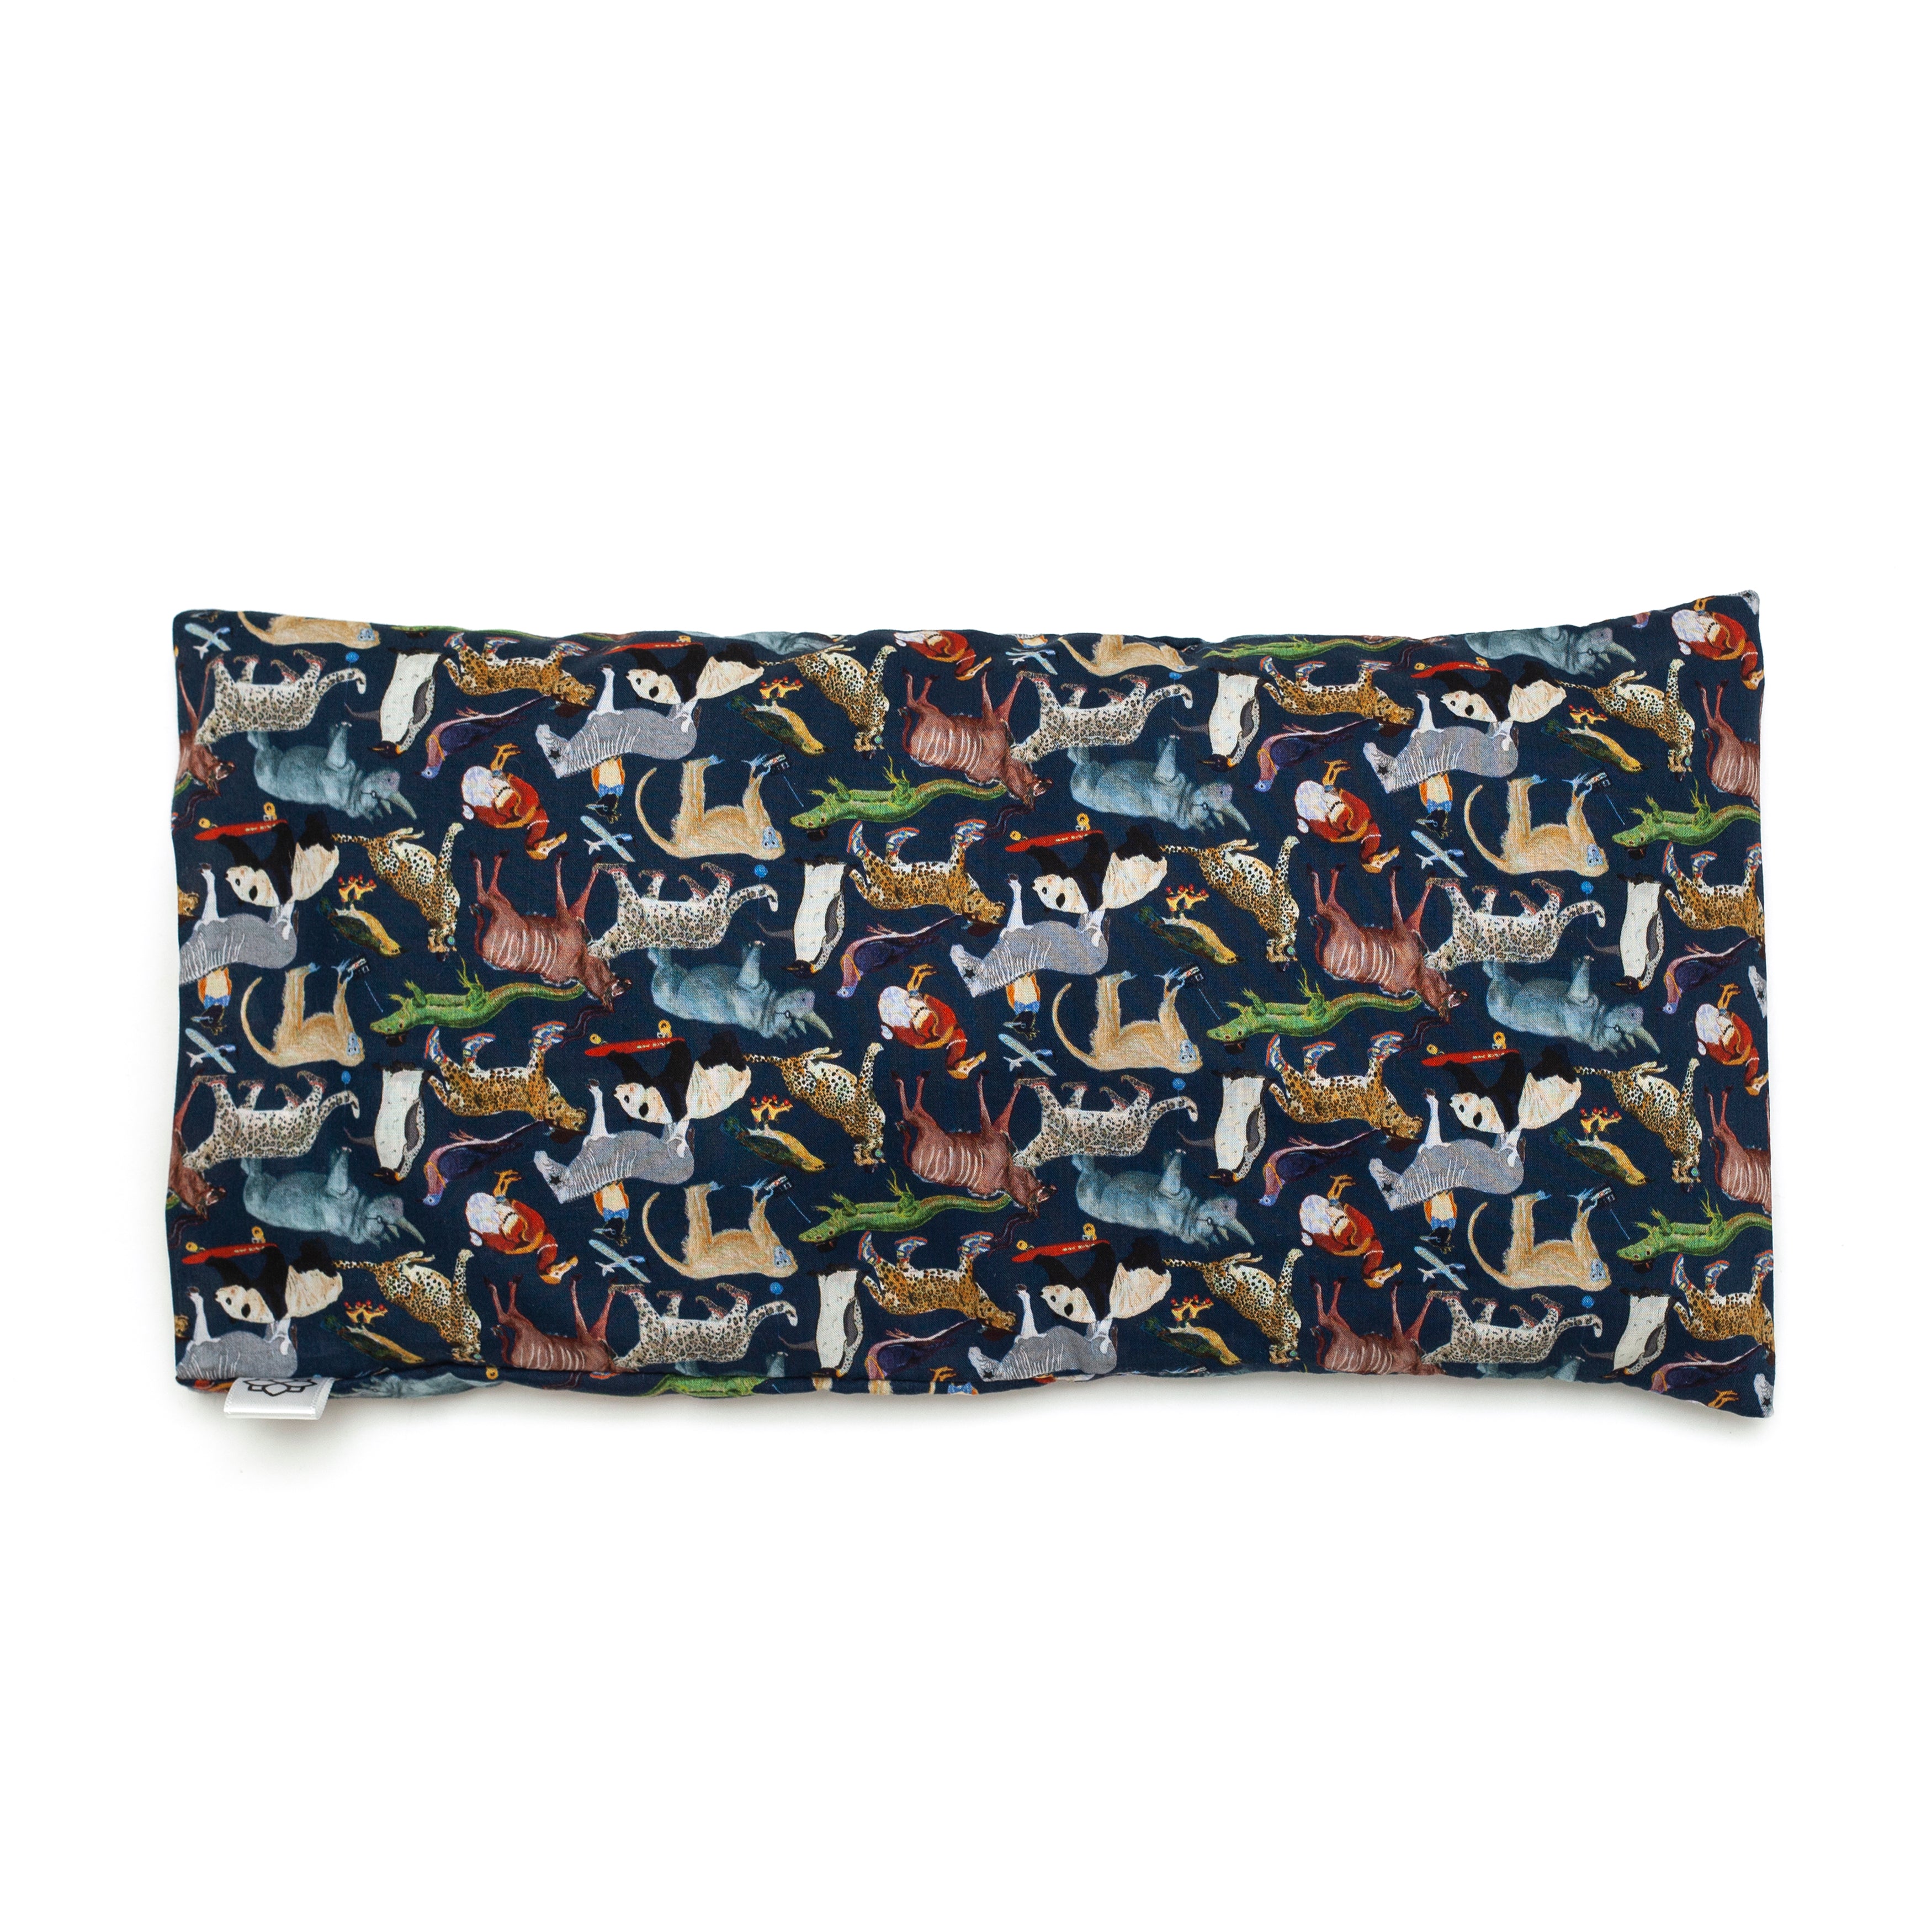 Aromatherapy Eye Pillow in Liberty fabric animal print. Eye pillows are for yoga meditation, relaxation and sleep. Great for children who struggle with sleep.